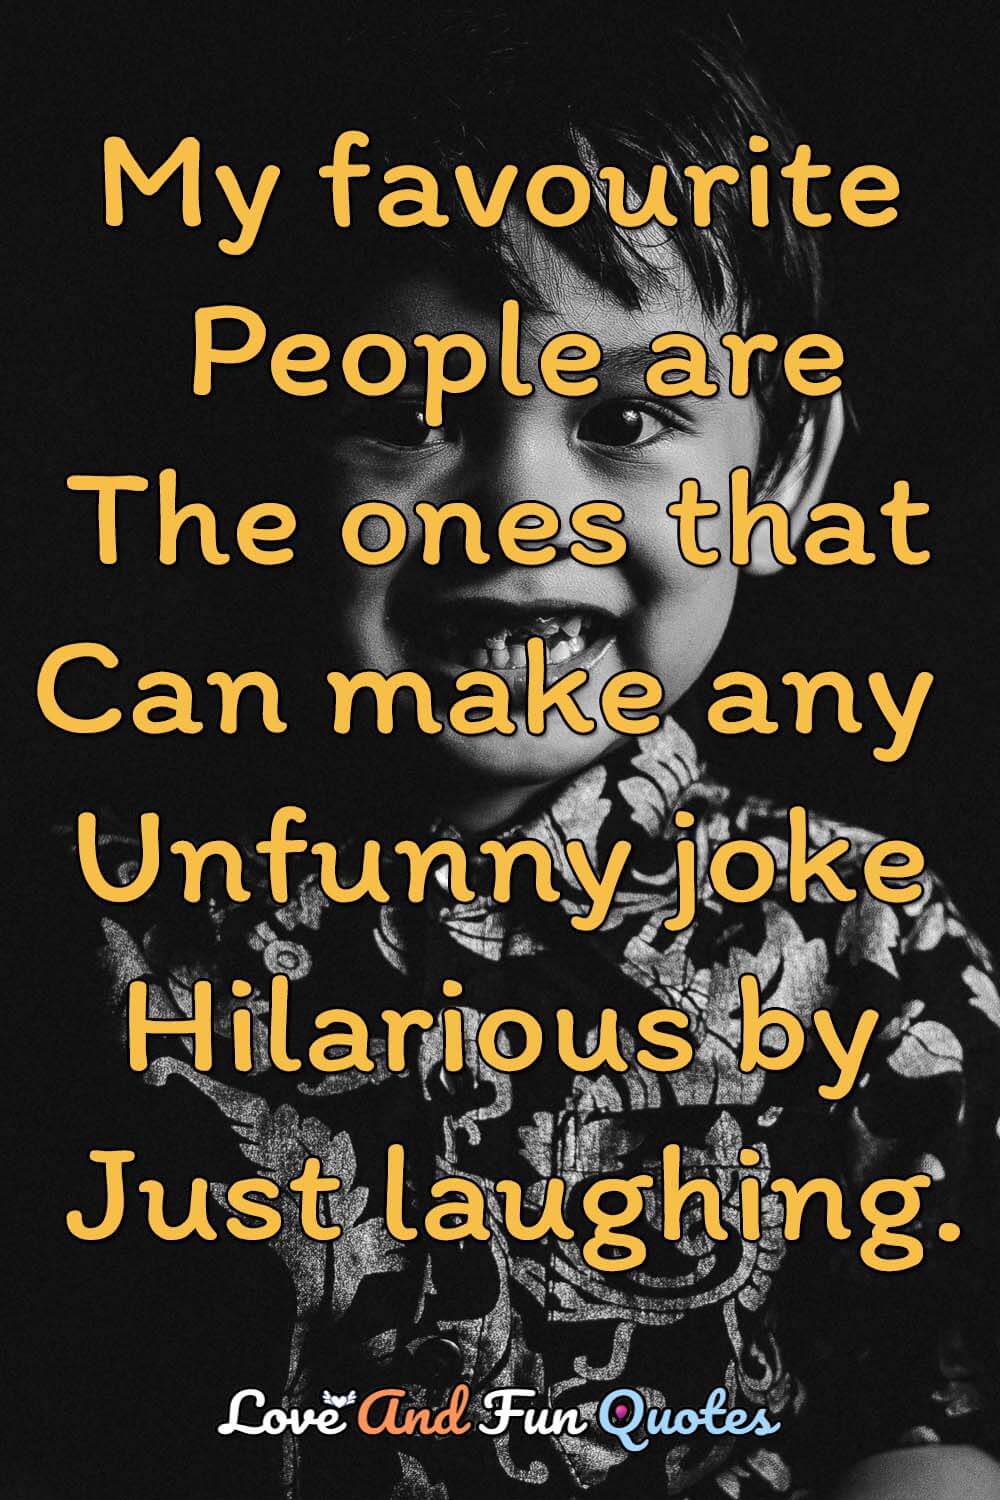 My favorite people are the ones that can make any unfunny joke hilarious by just laughing.-Ziad K. Abdelnour